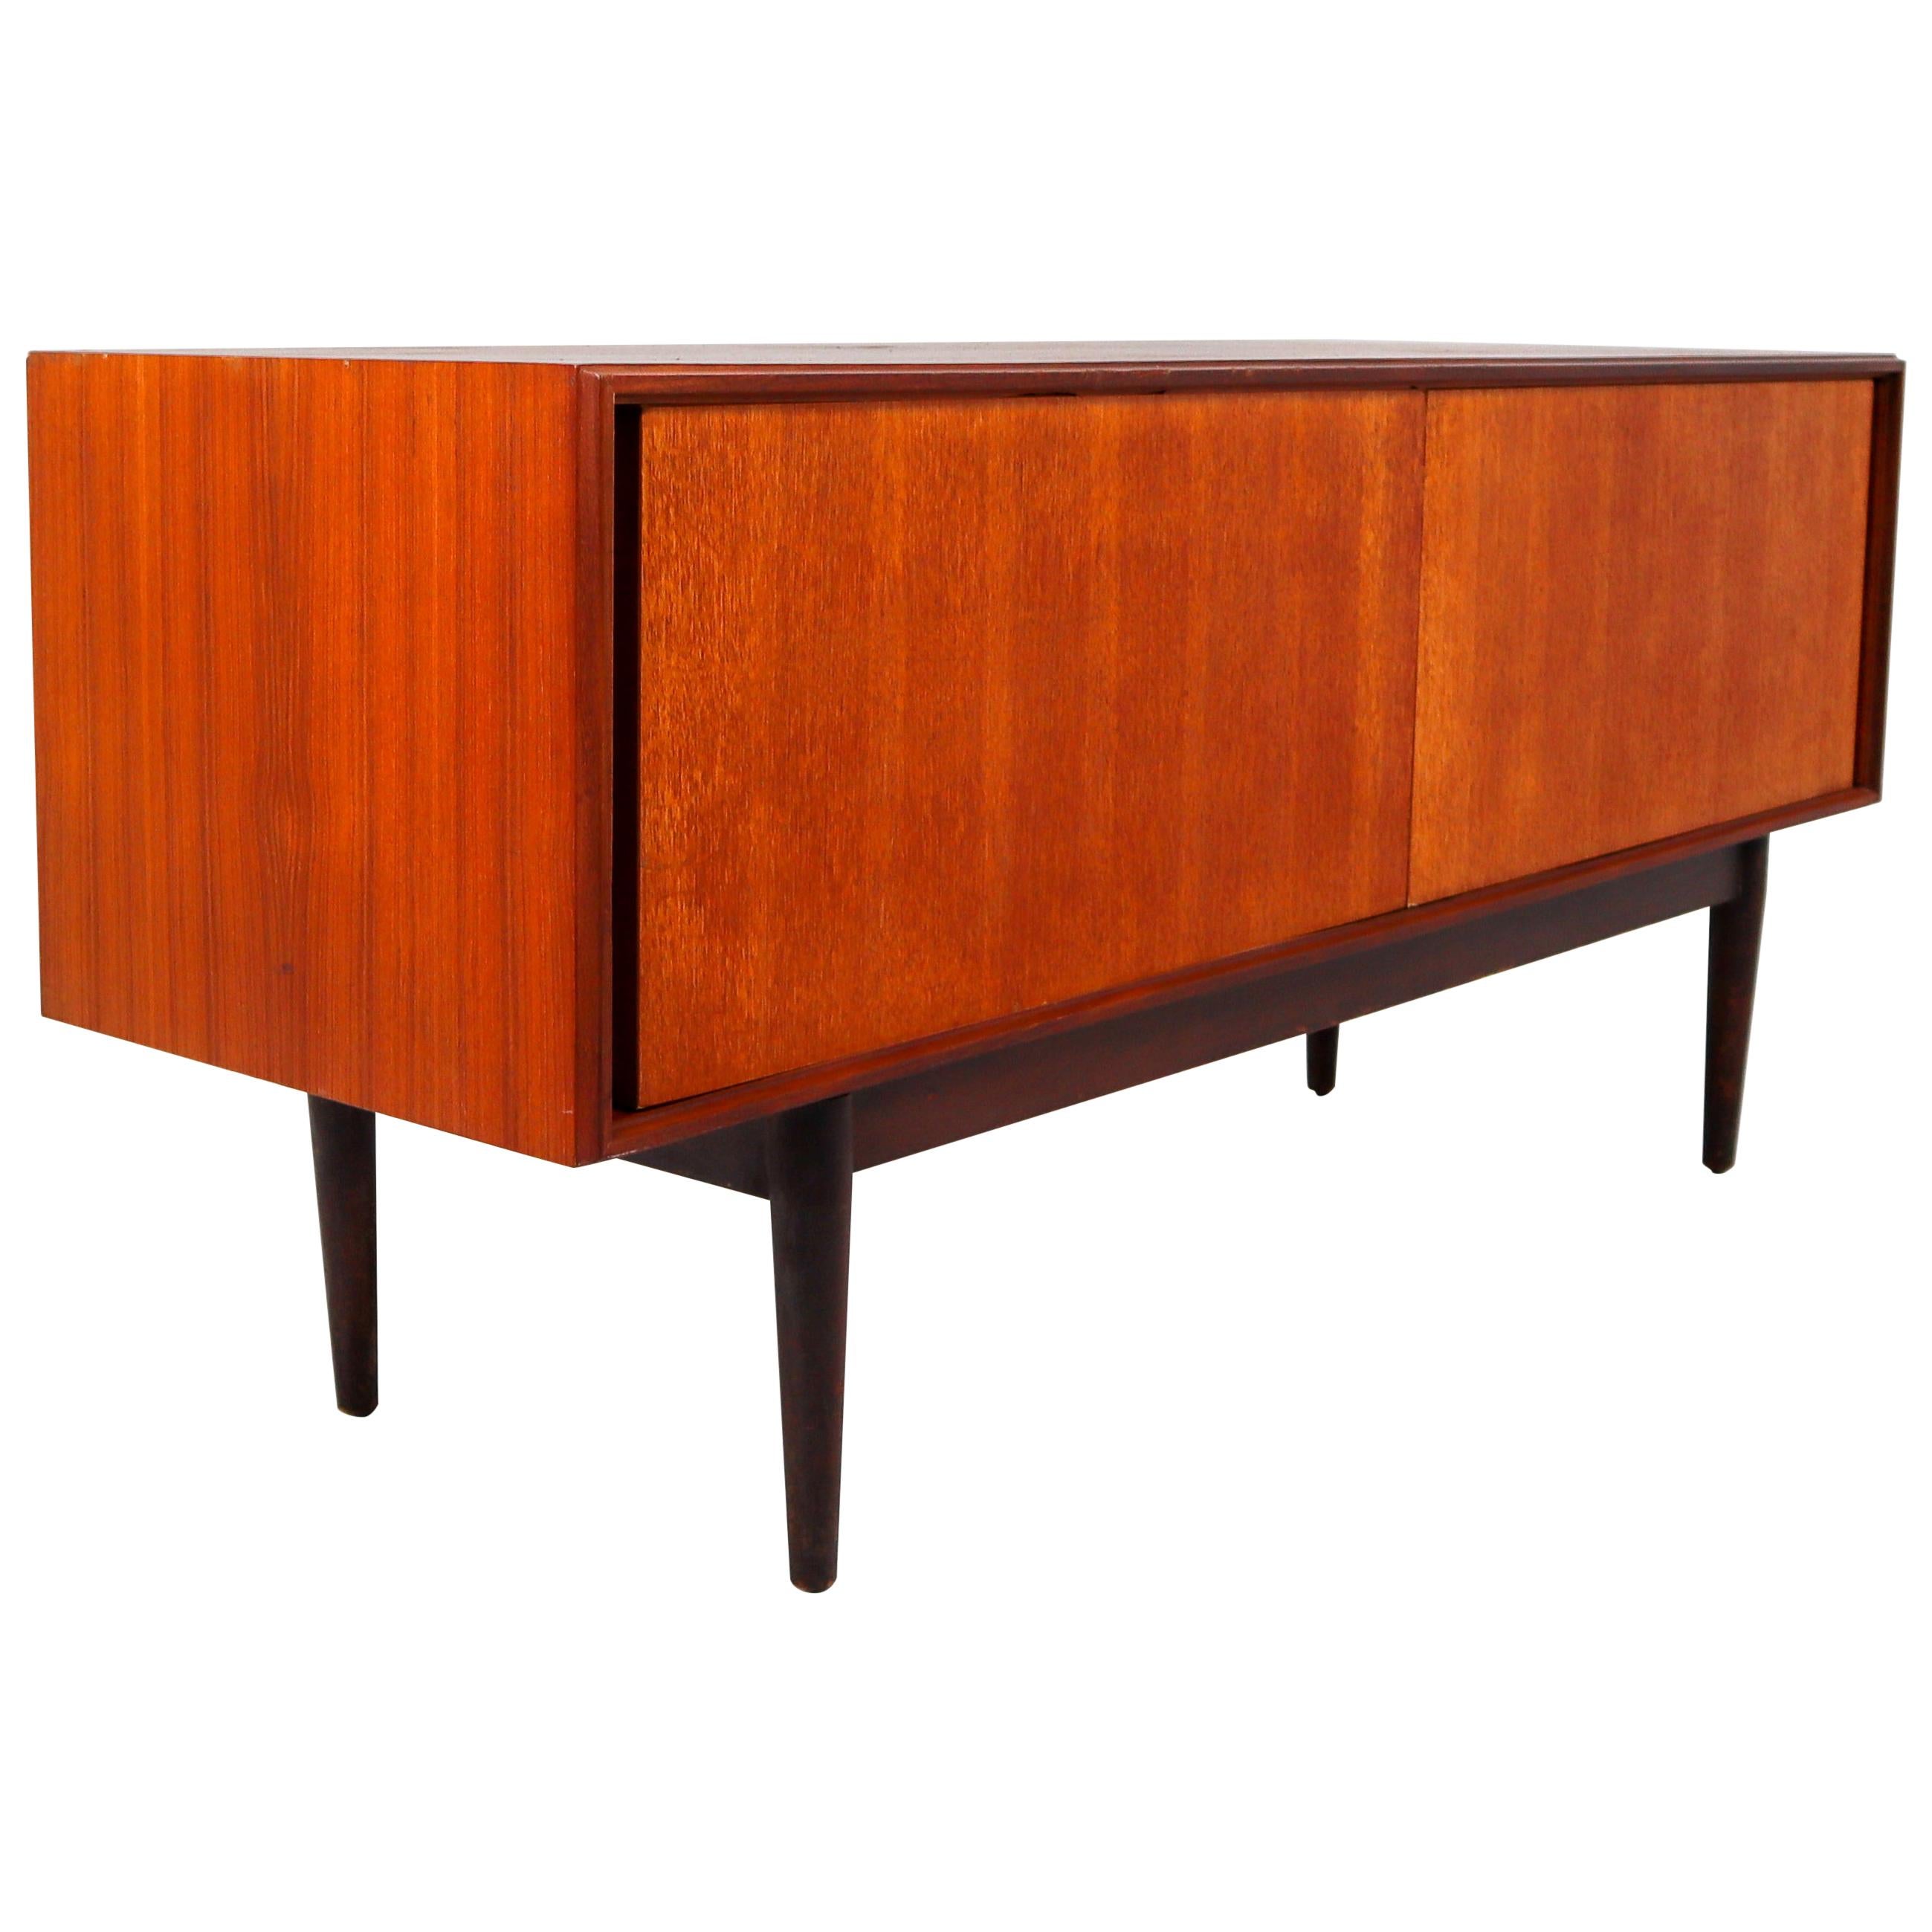 Minimalism Teak Sideboard or Credenza from the 1960s, Made in Denmark